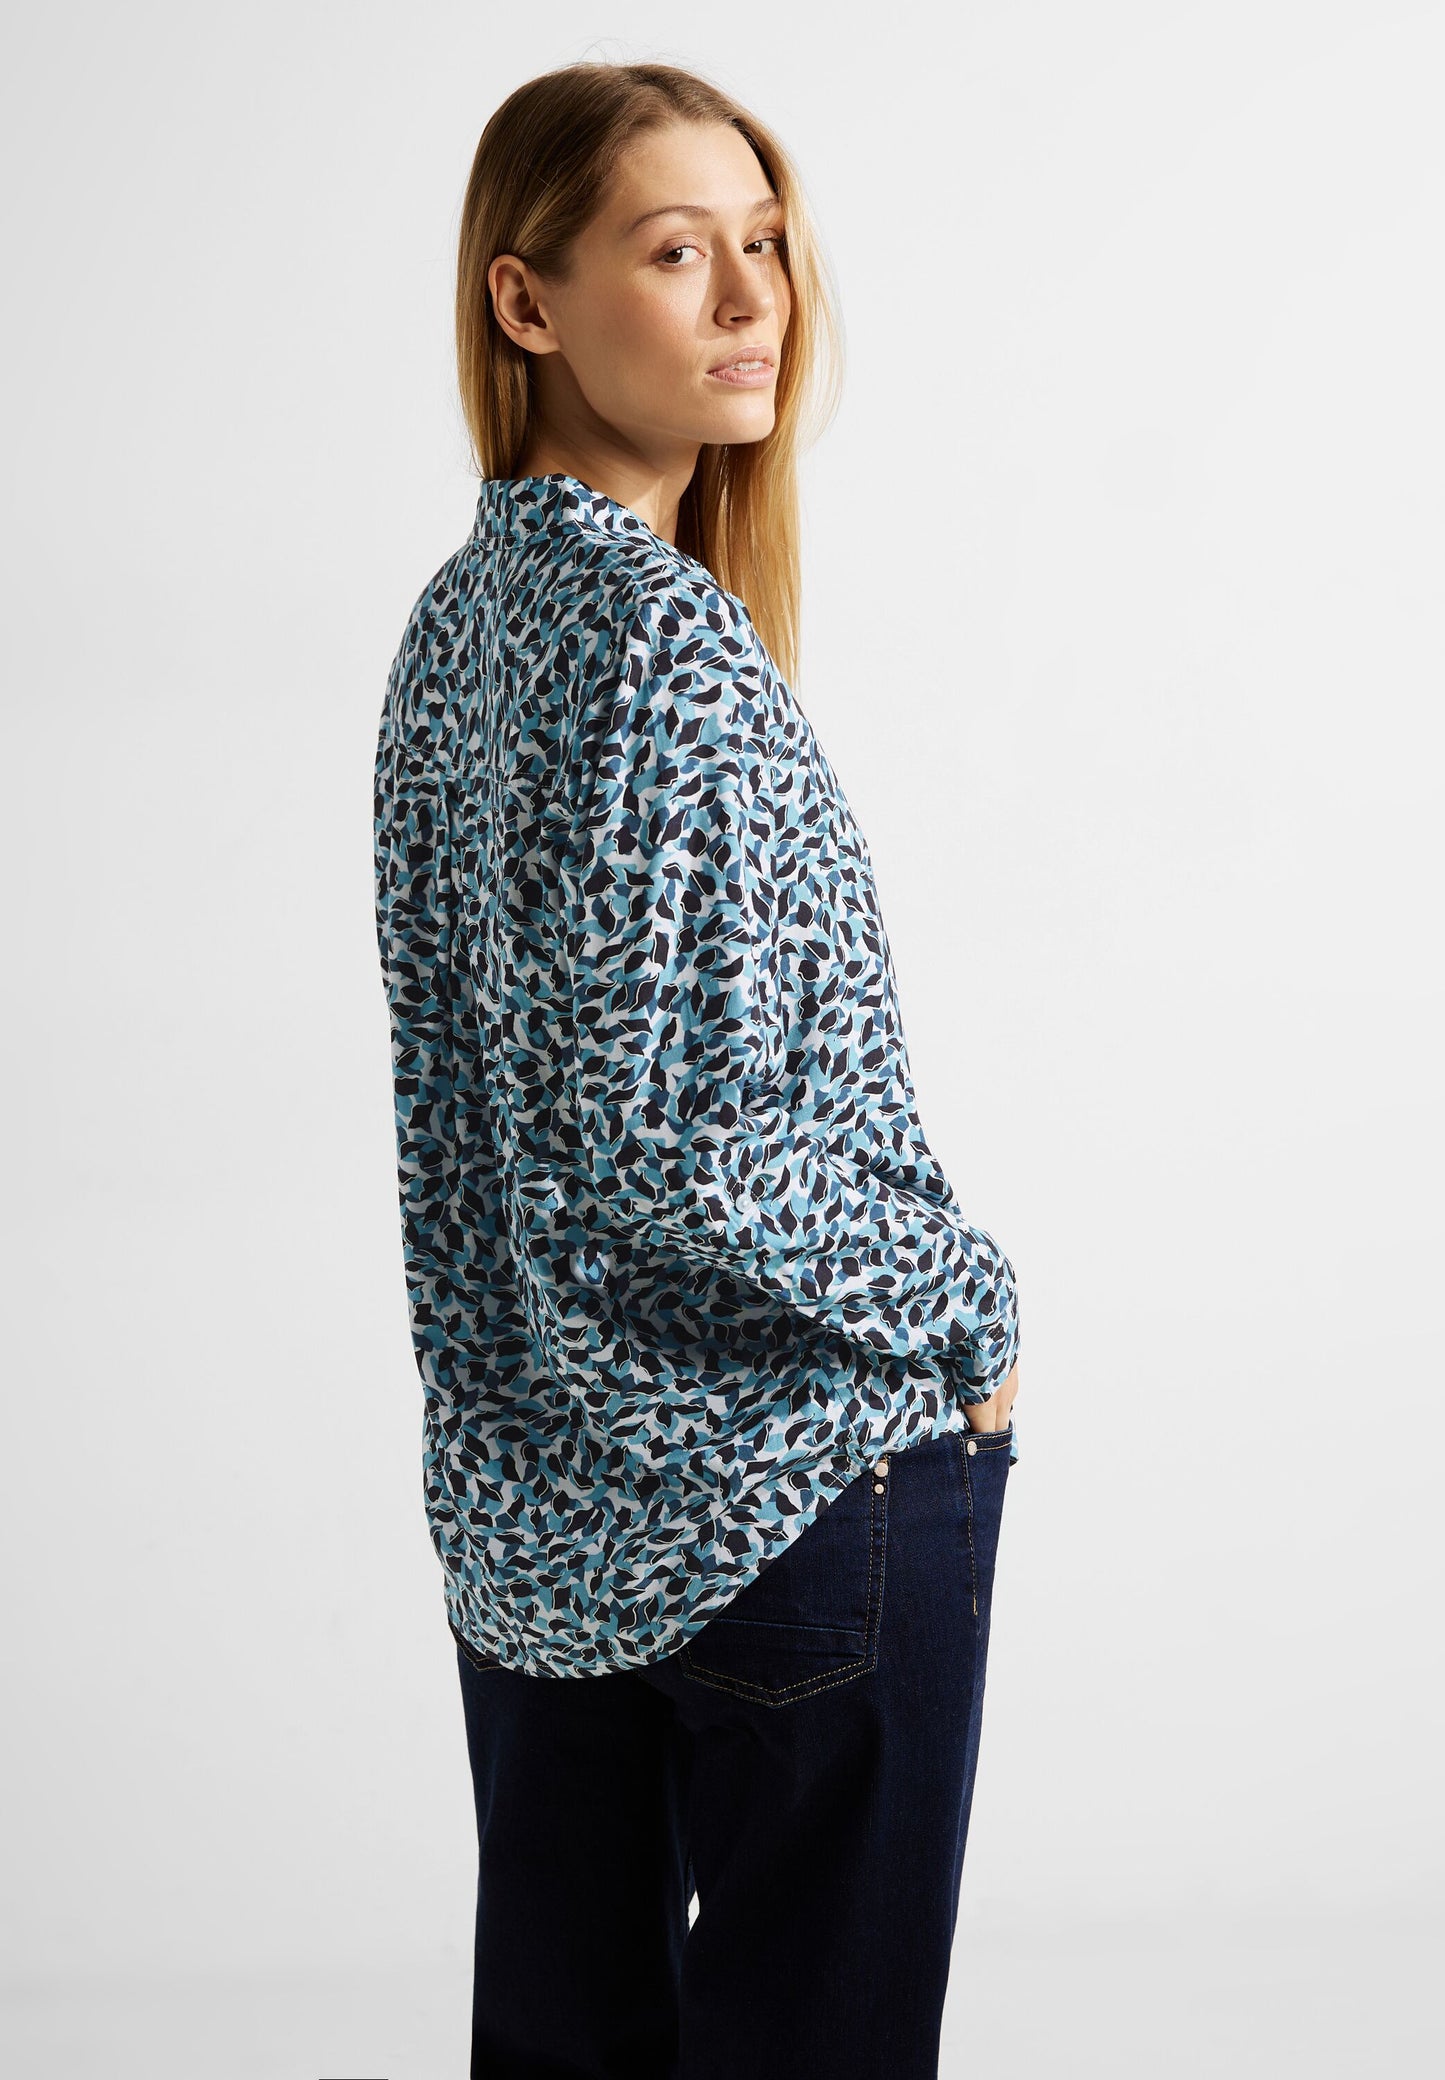 CECIL - Bluse mit grafischem Print - Farbe: strong petrol blue